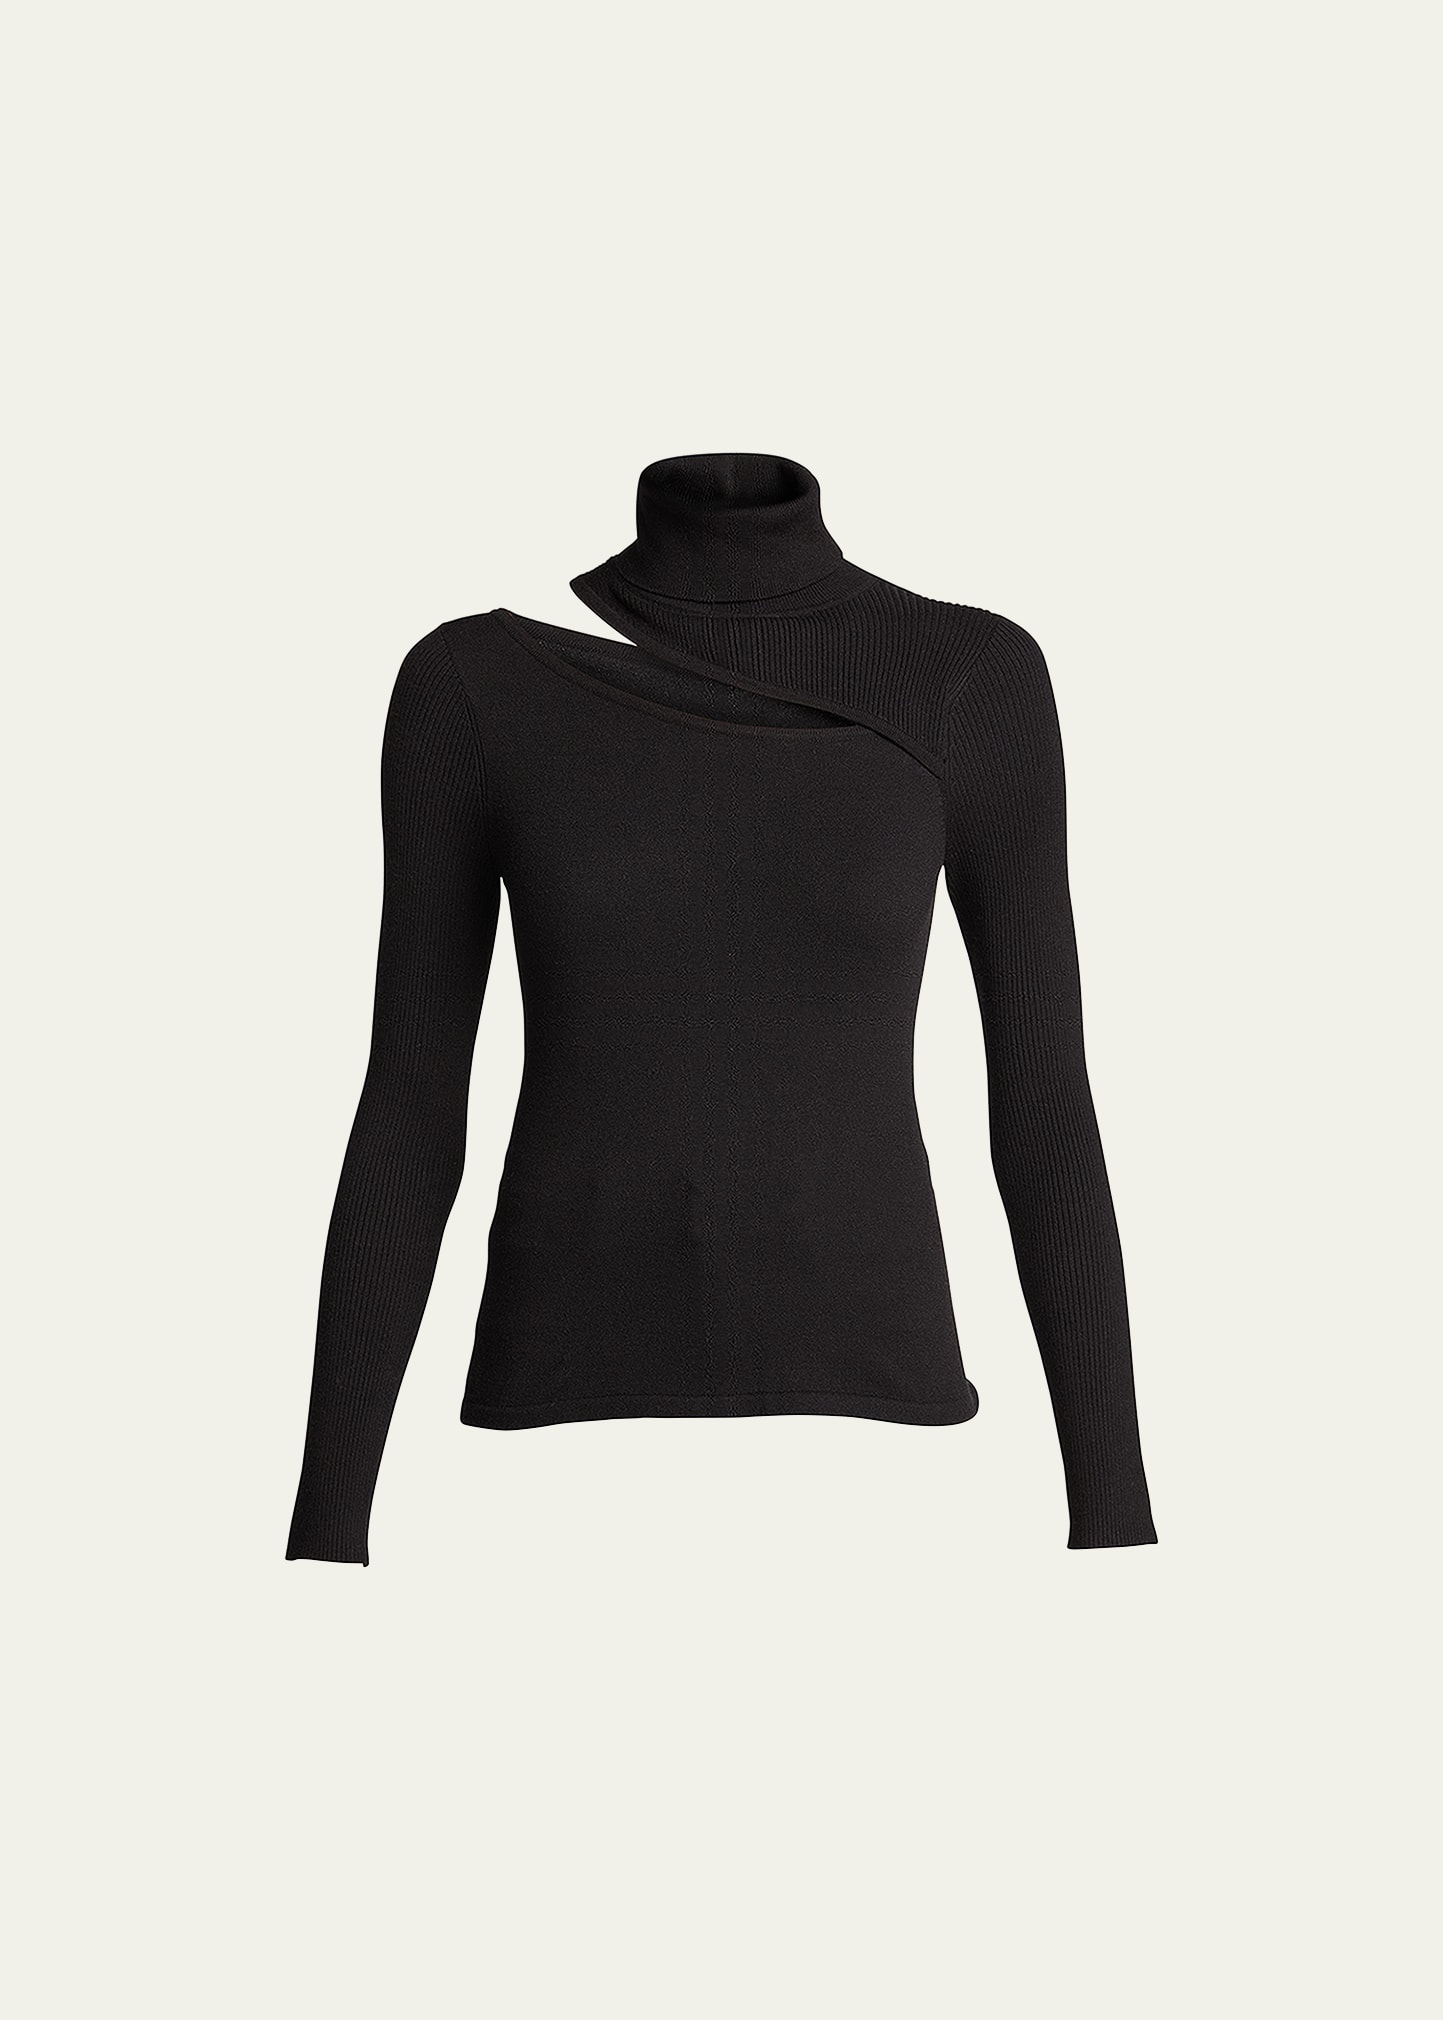 L'Agence Everlee Cutout Sweater